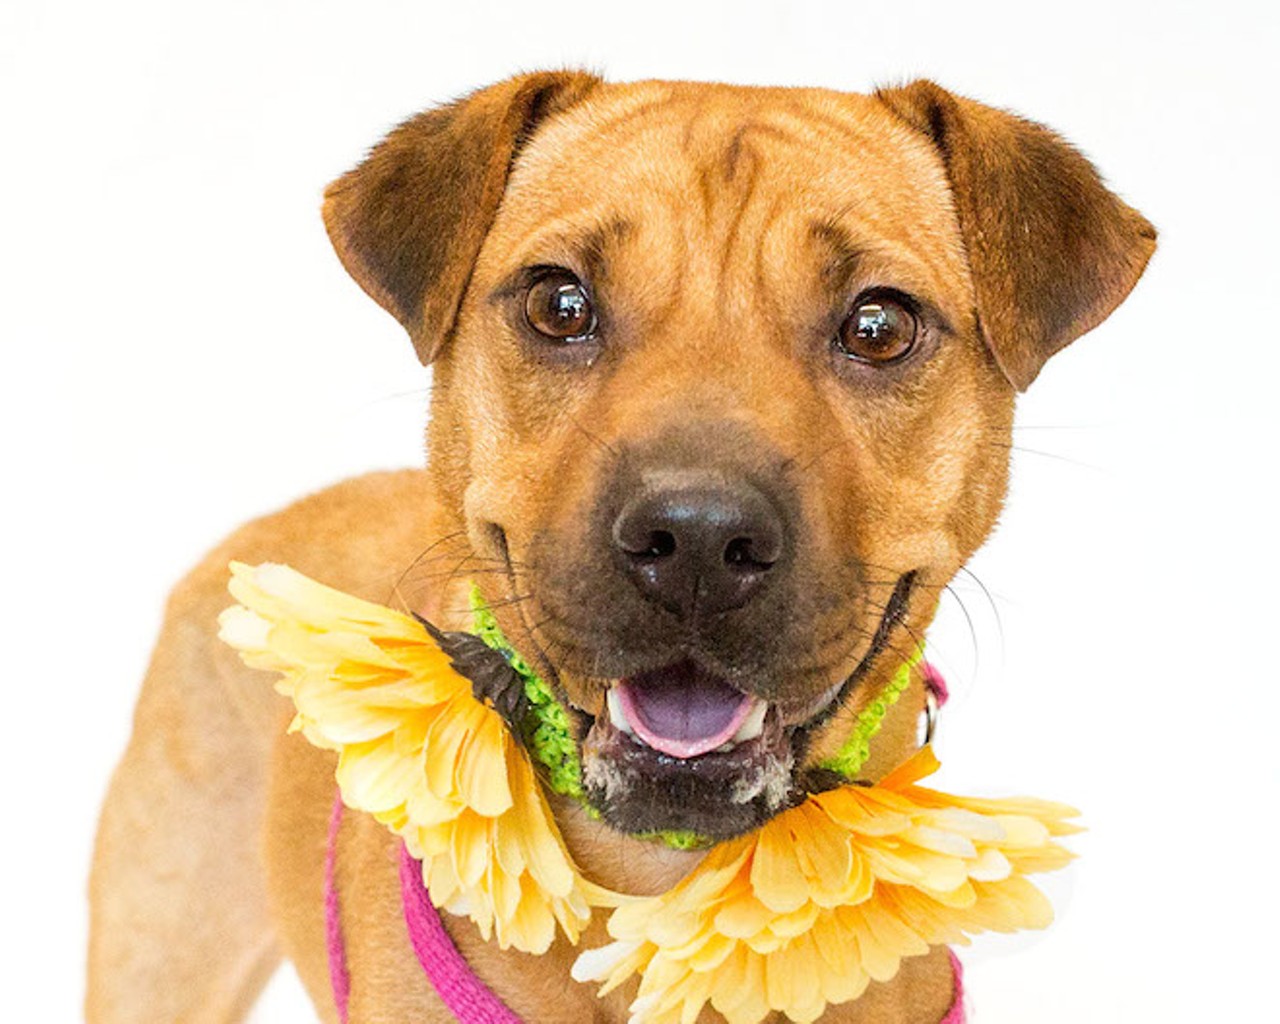 30 certified pre-owned pups waiting to be adopted at Orange County Animal Services